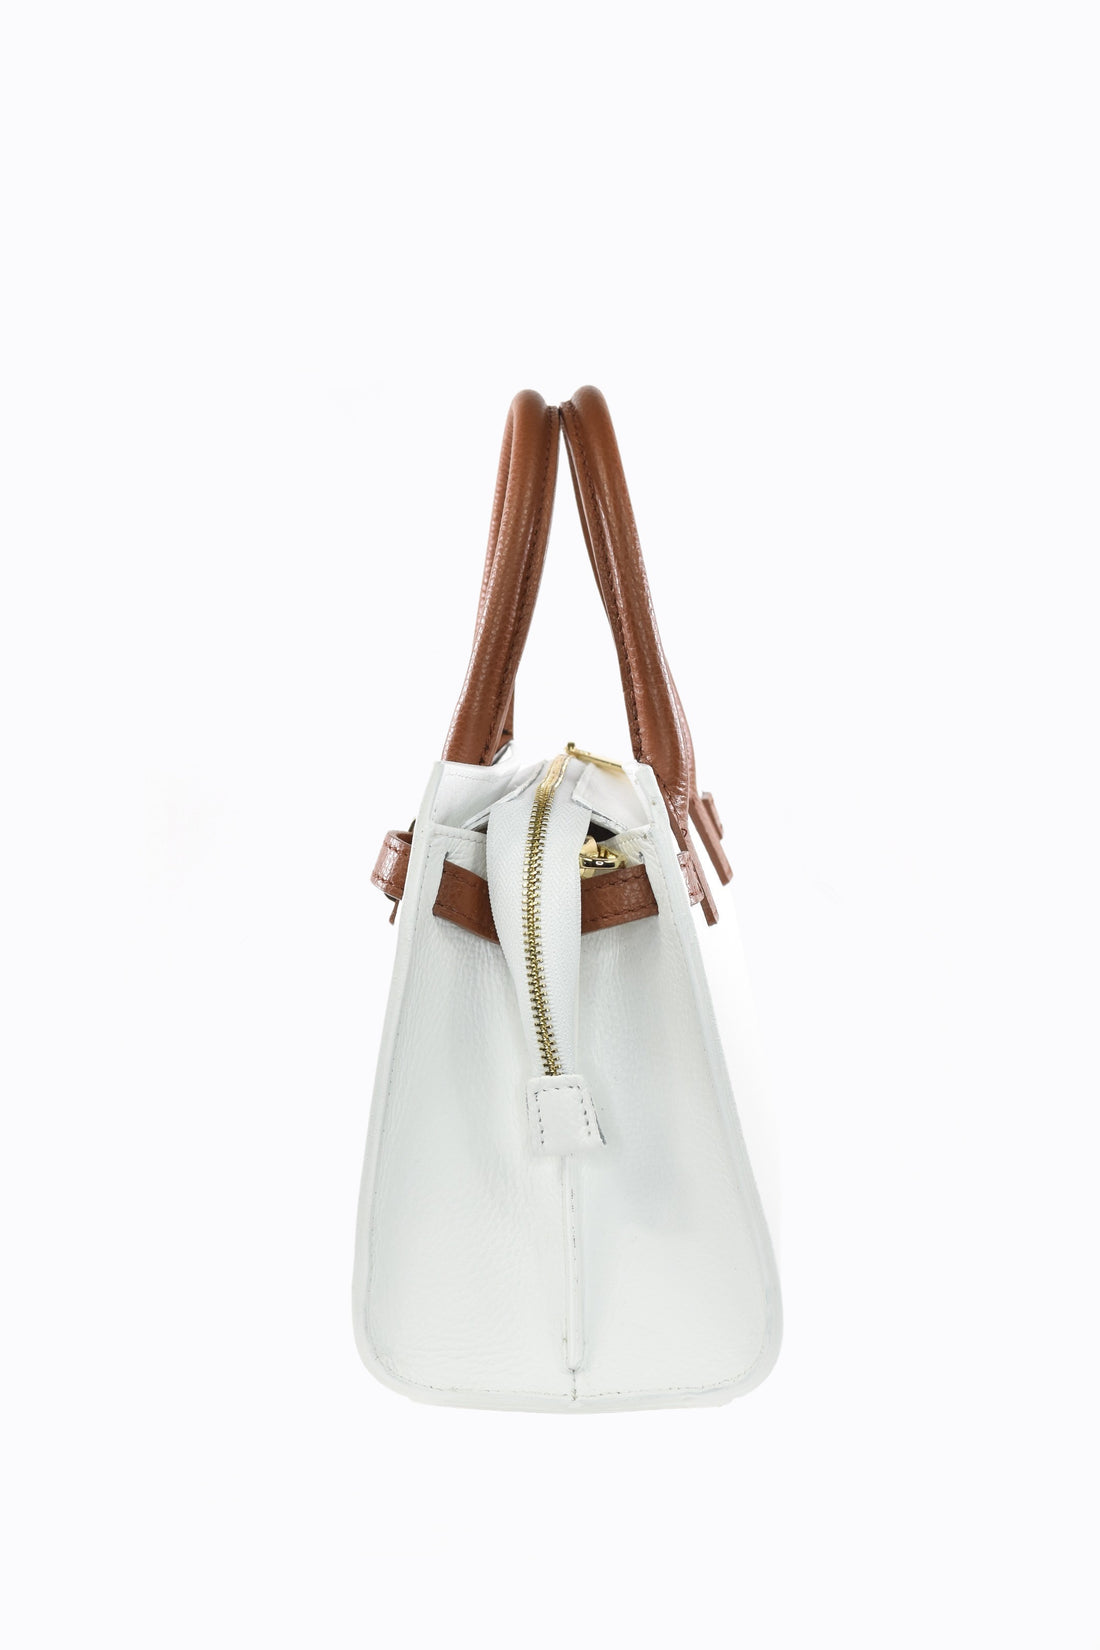 Borsa Grace Limited edition in pelle Togo Bianca